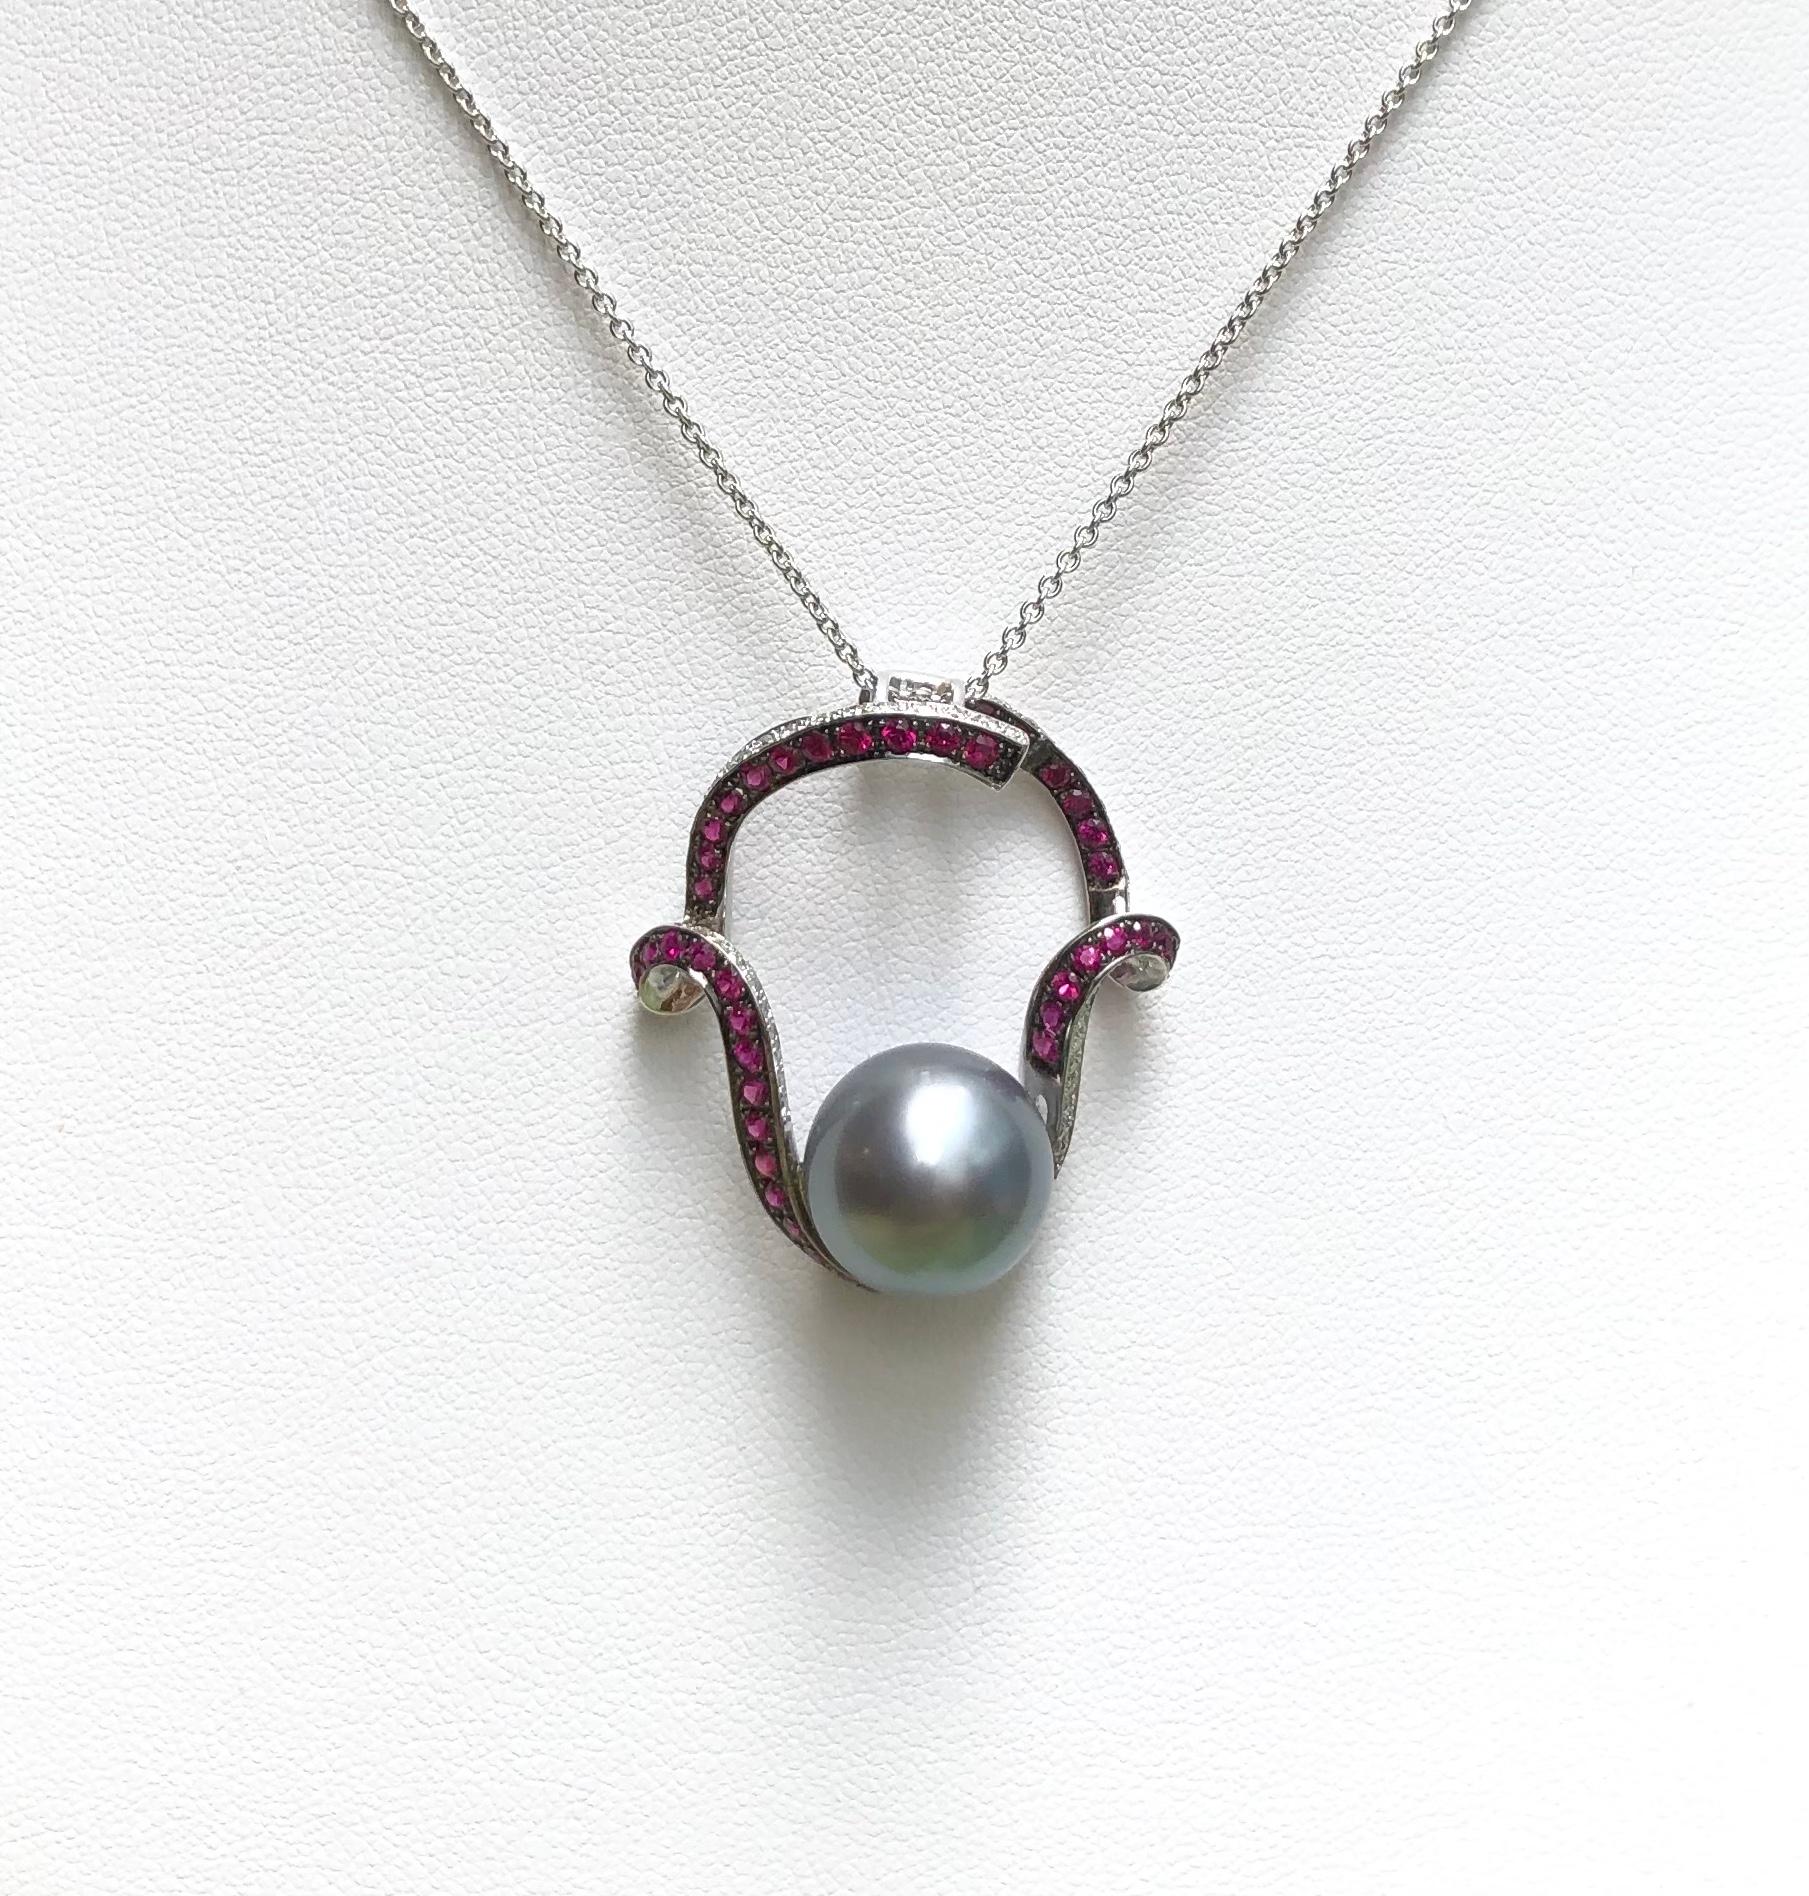 South Sea Pearl, Ruby 2.43 carats and Diamond 0.57 carat Pendant set in 18 Karat White Gold Settings
(chain not included)

Width: 3.0 cm 
Length: 3.4 cm
Total Weight: 8.28 grams

